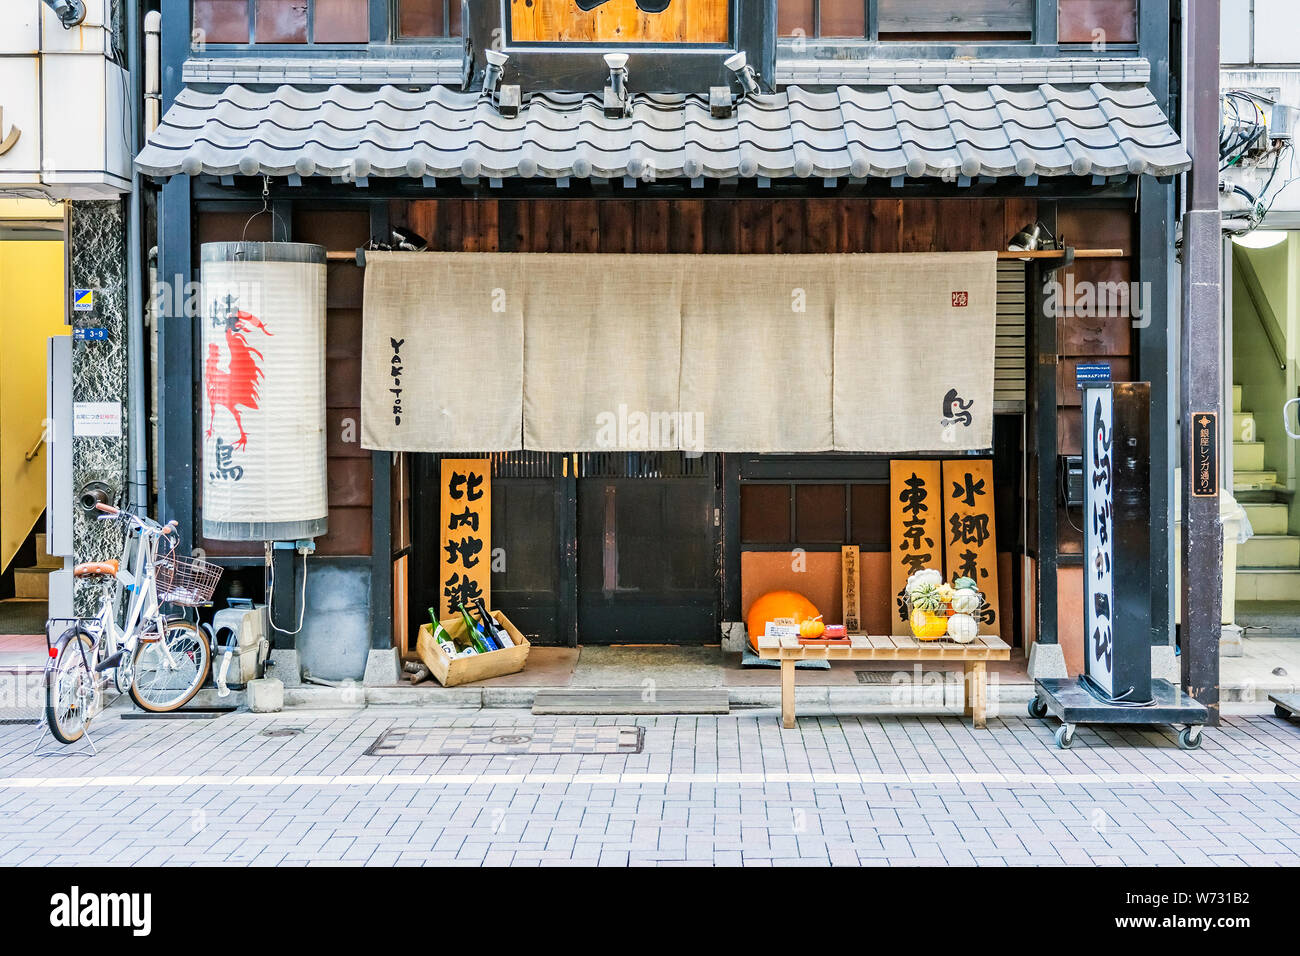 TOKYO, JAPAN - OCTOBER 6, 2018. The Main Entrance Of Japanese Restaurant. Traditional Wooden Facade Of Food Store In Japan. Stock Photo